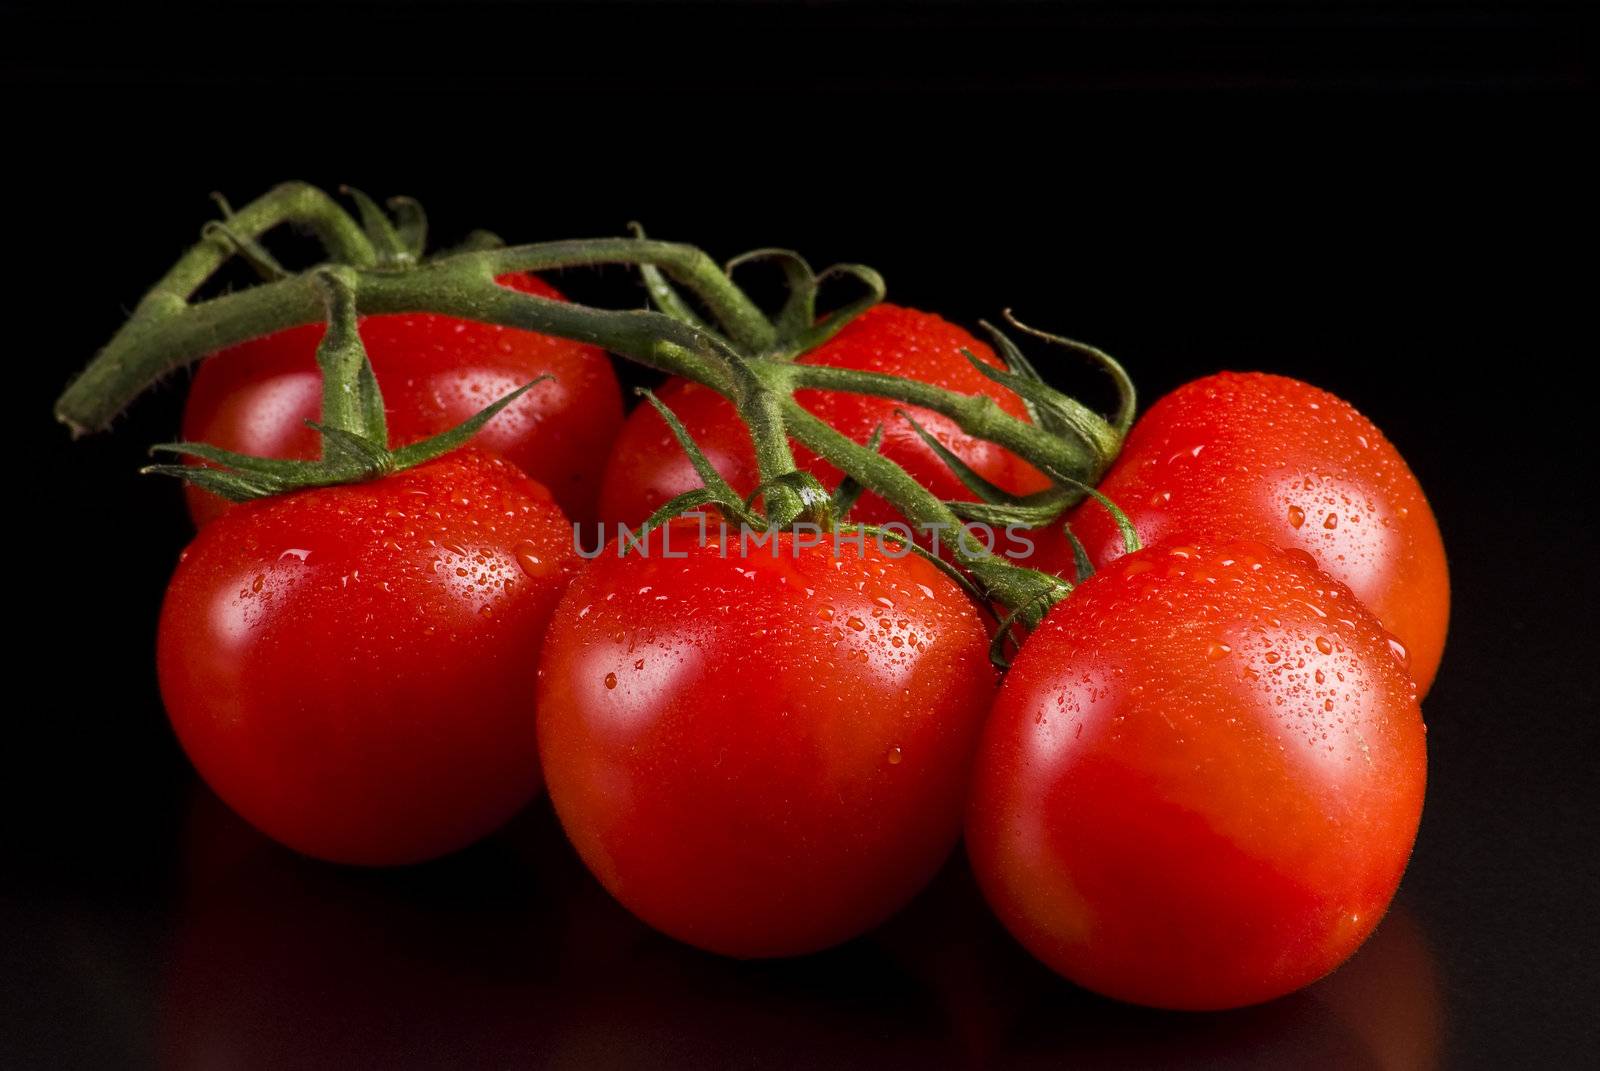 Branch of tomatoes on a black background